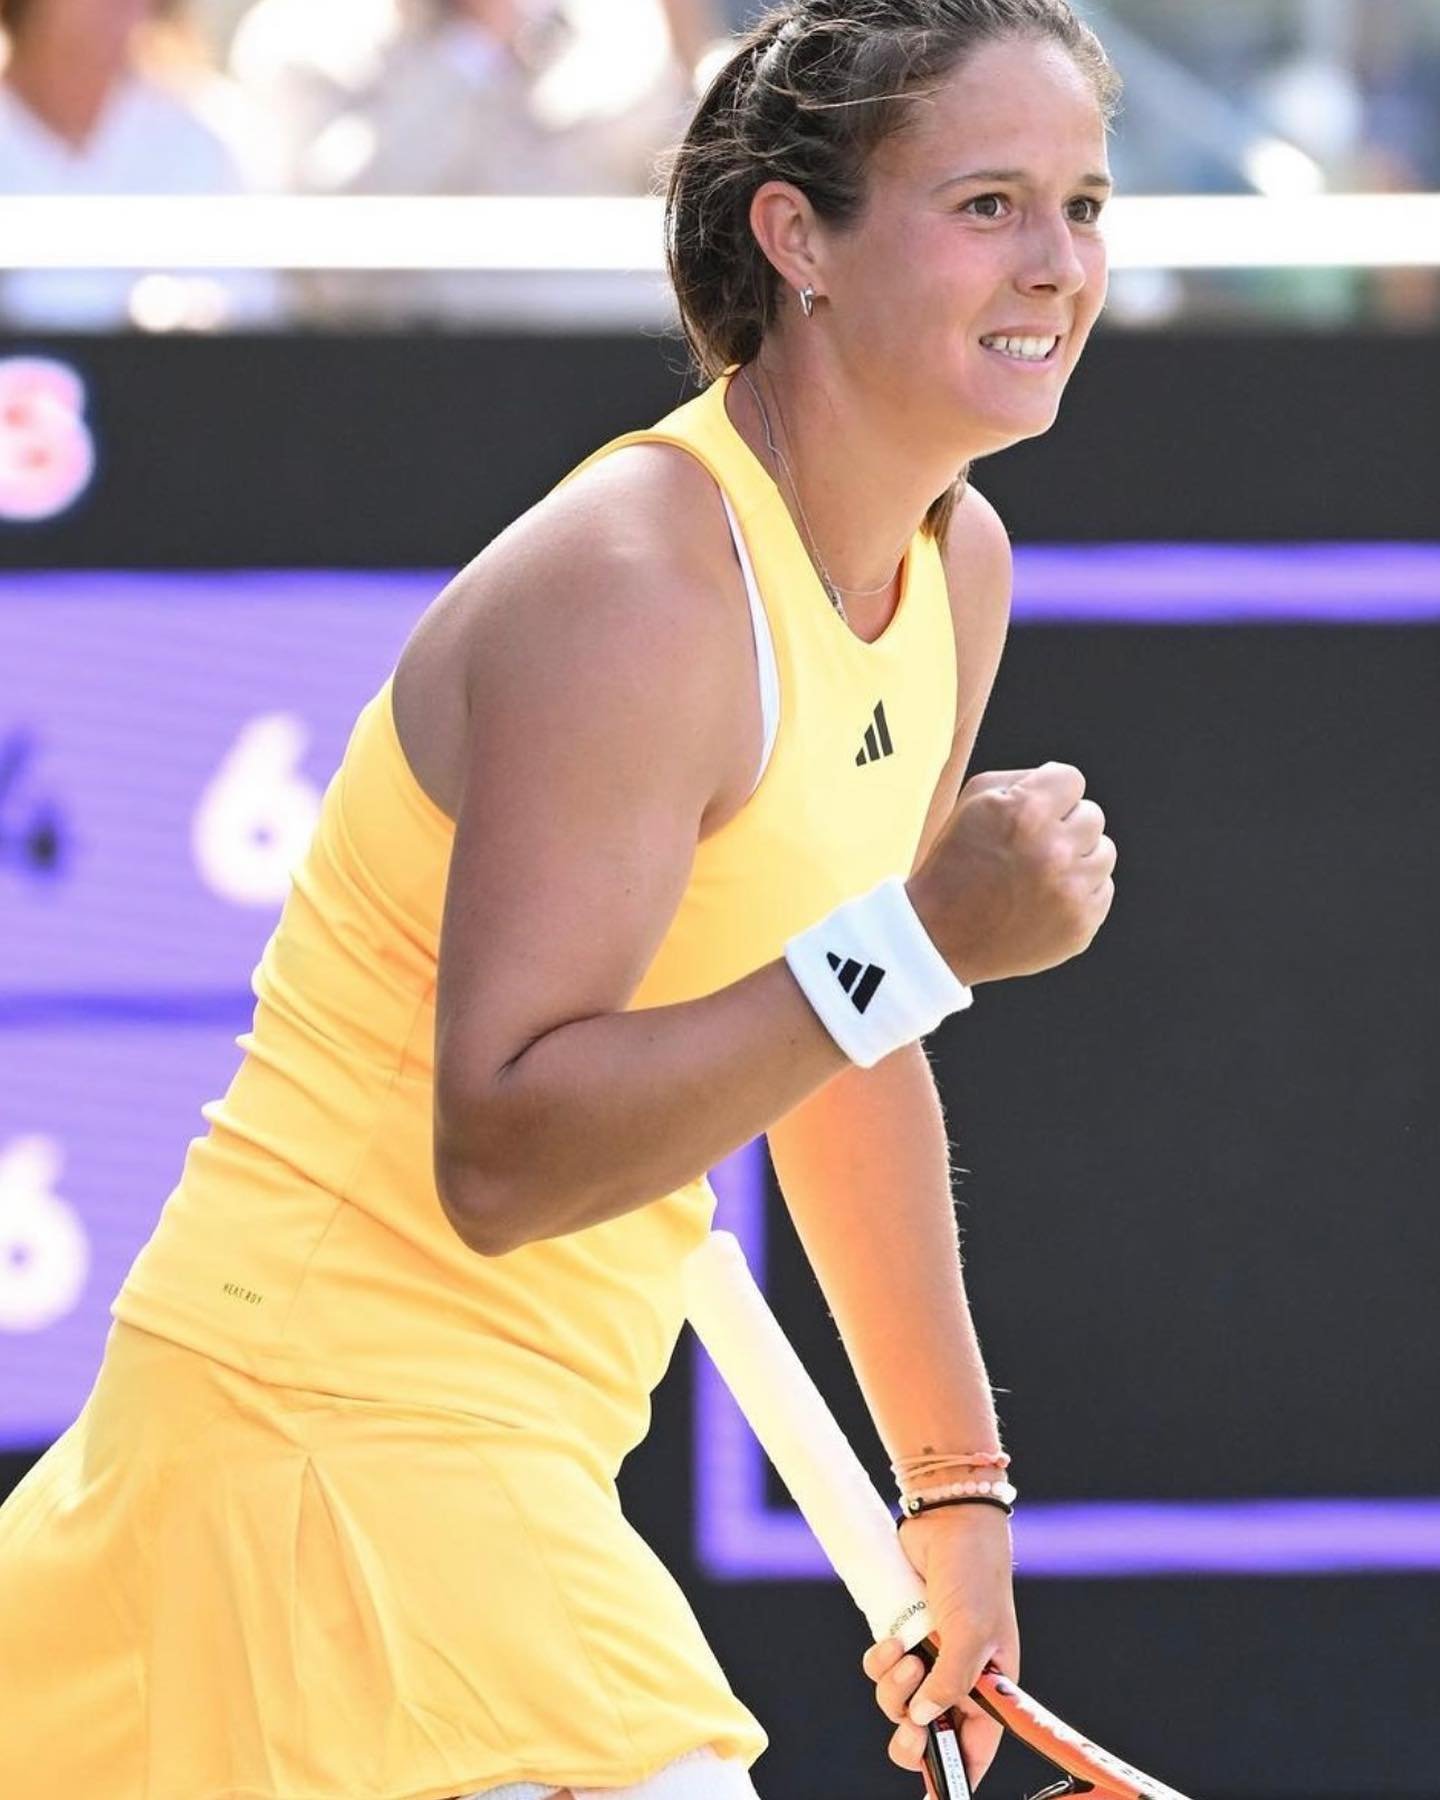 Not to be in the end for our little Miss Sunshine @kasatkina but what a great week it was. We are very proud of you and your efforts, Dasha.

Keep working, keep building. More to come 💪🏽💪🏽🔥🔥

#DashaKasatkina #Kasatkina #AdiDash #DashCathlon #Ar